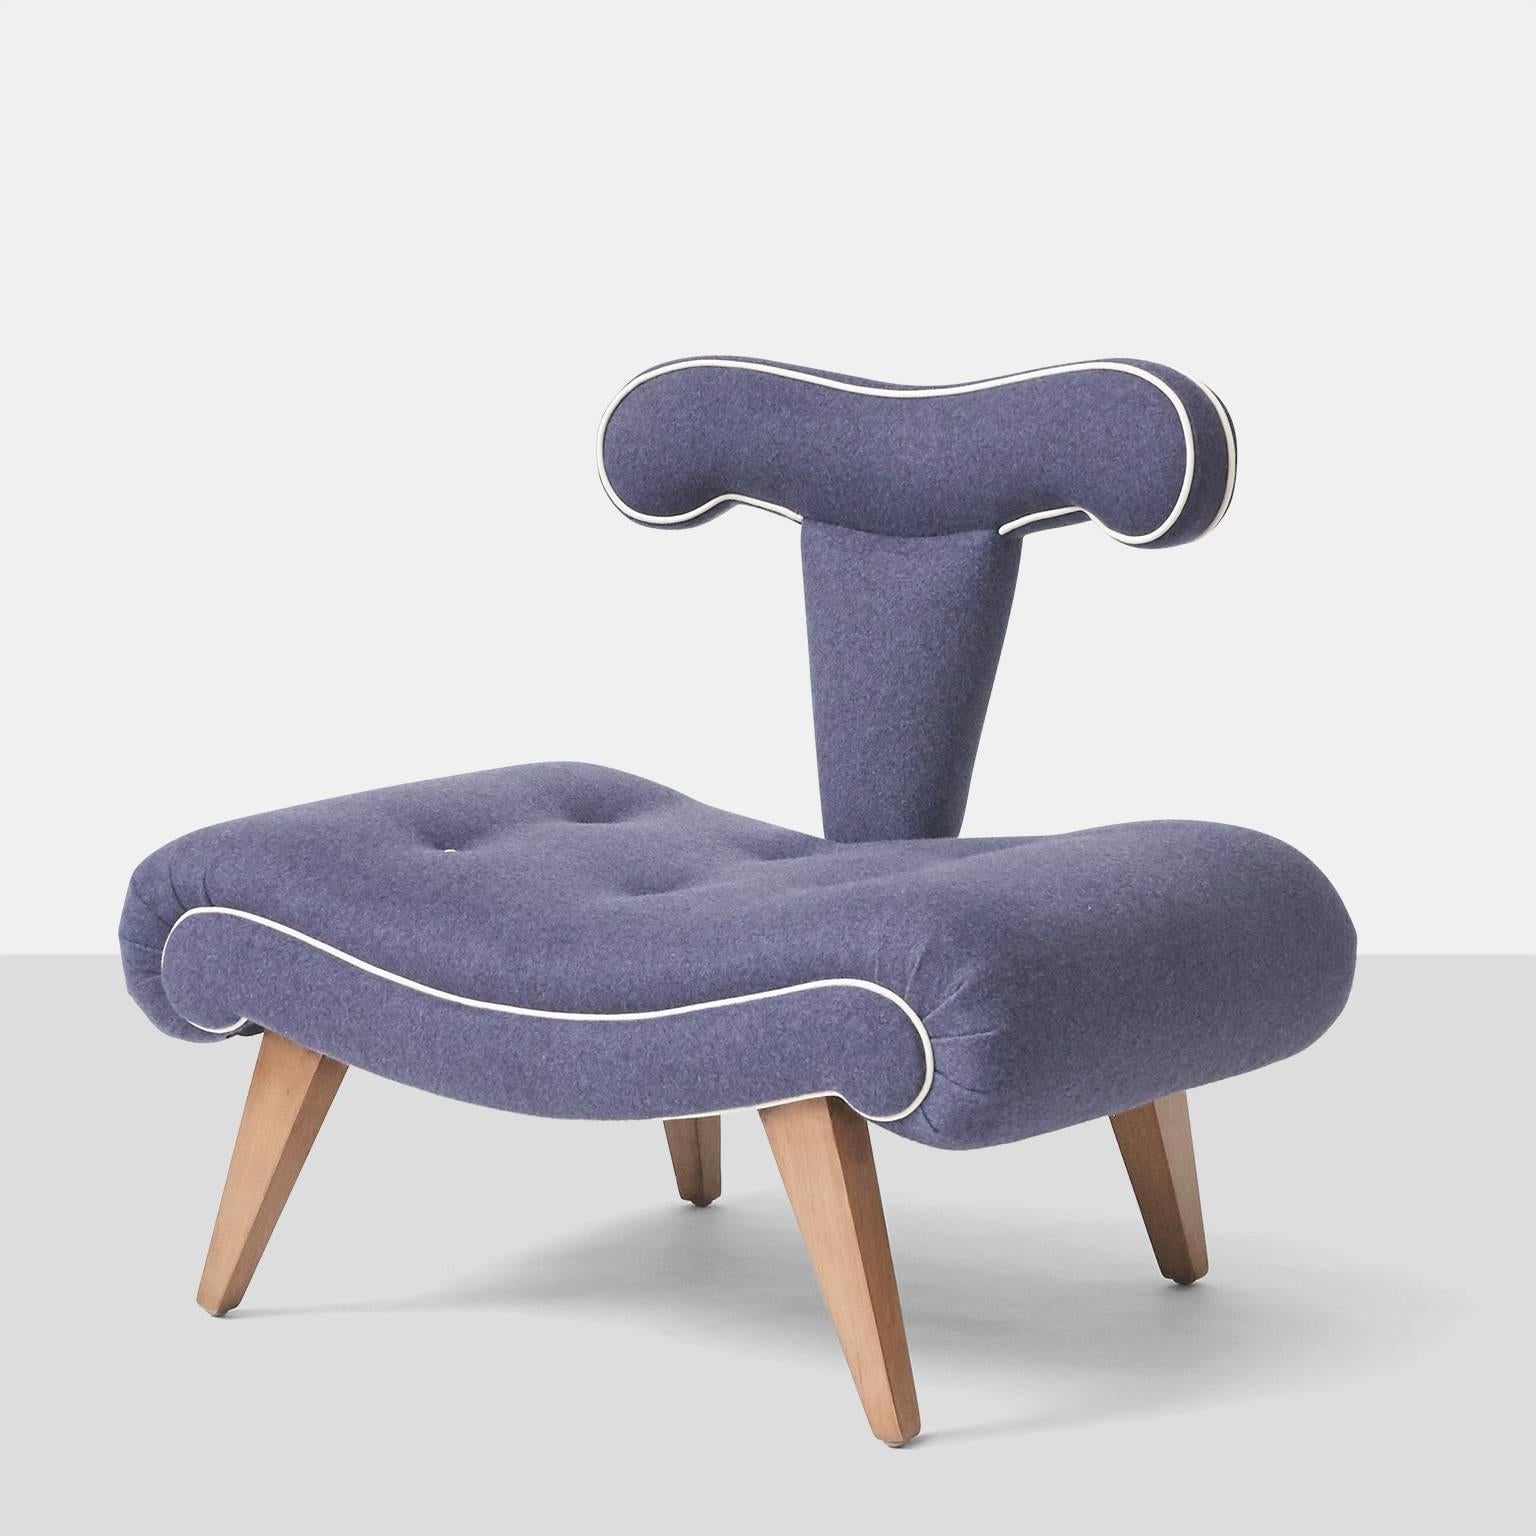 Grosfeld House slipper chair
Expertly restored slipper chair from the 1940s made by Grosfeld House. Reupholstered in a deep lavender cashmere fabric from Holland and Sherry.